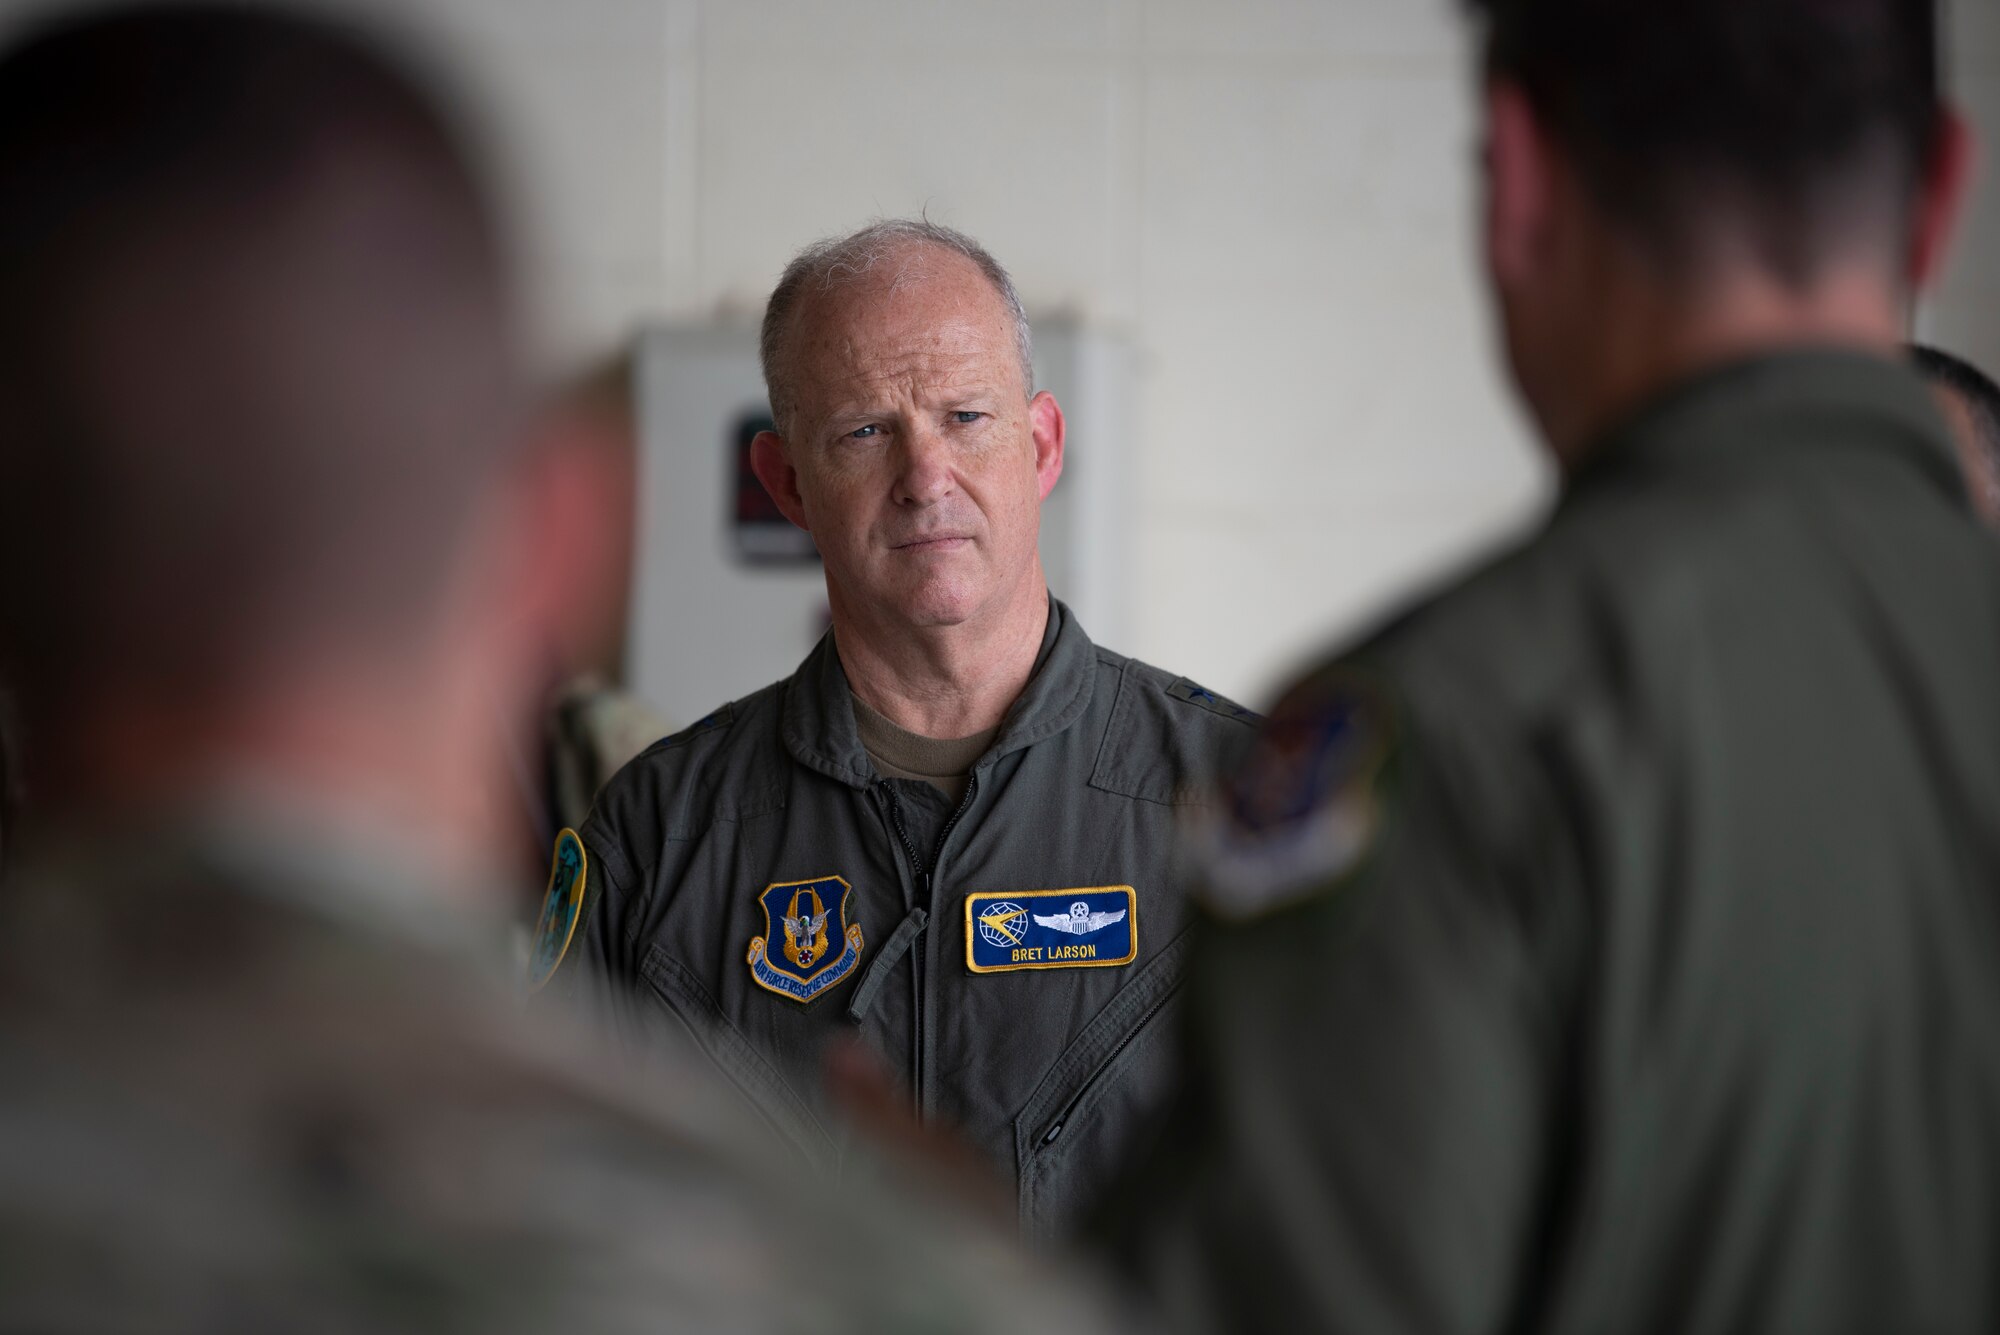 A photo of Maj. Gen. Bret C. Larson with two Airmen in the forefront blurred out.